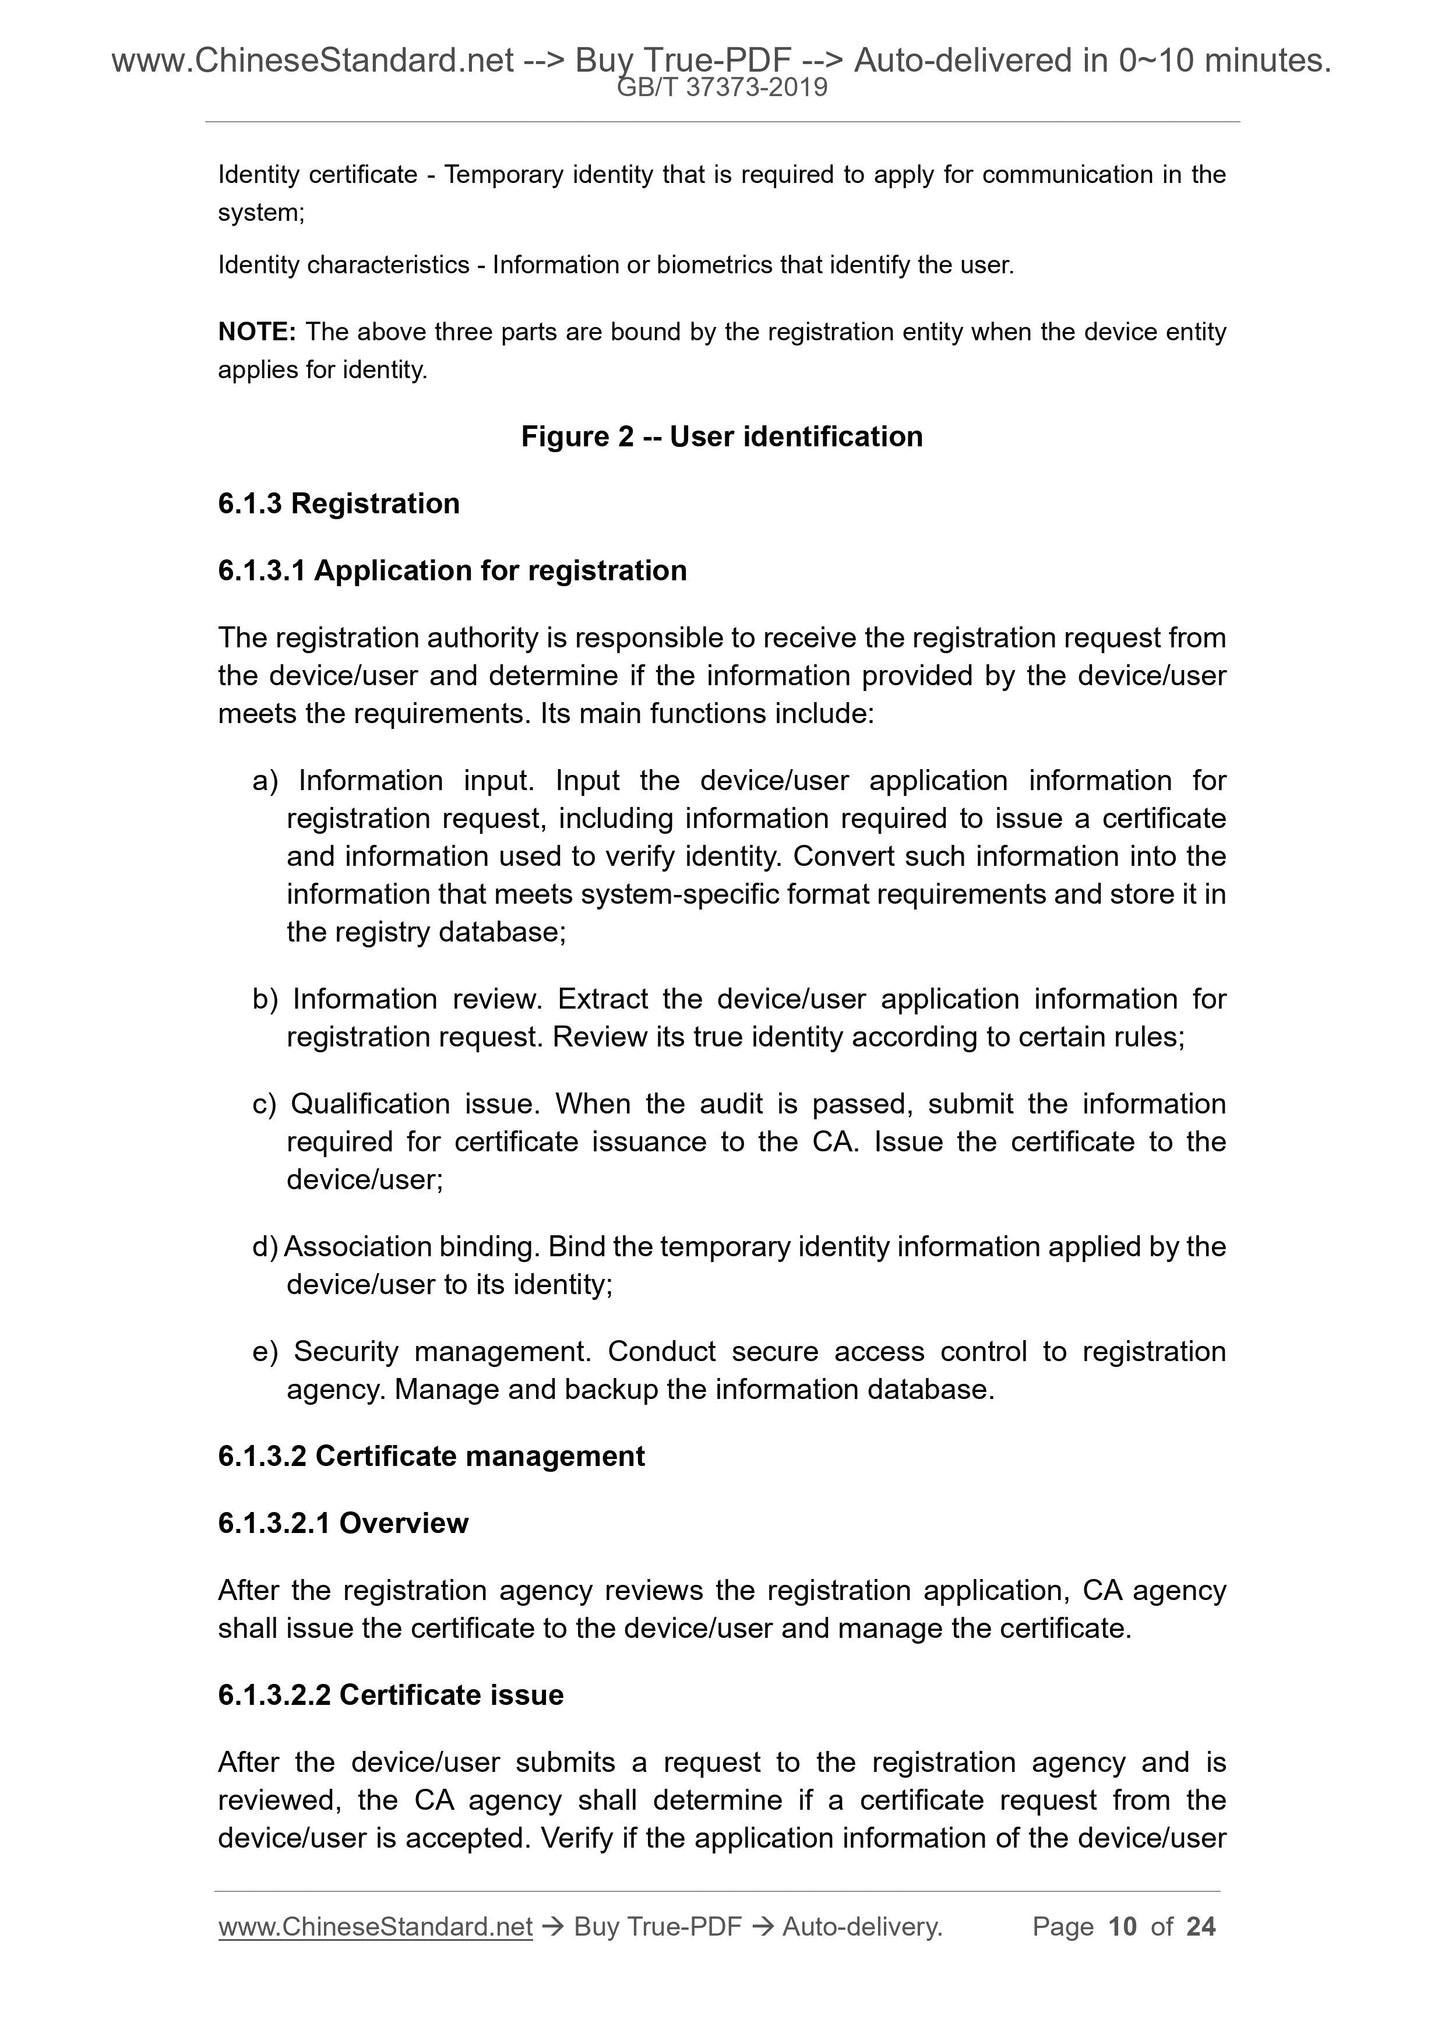 GB/T 37373-2019 Page 6